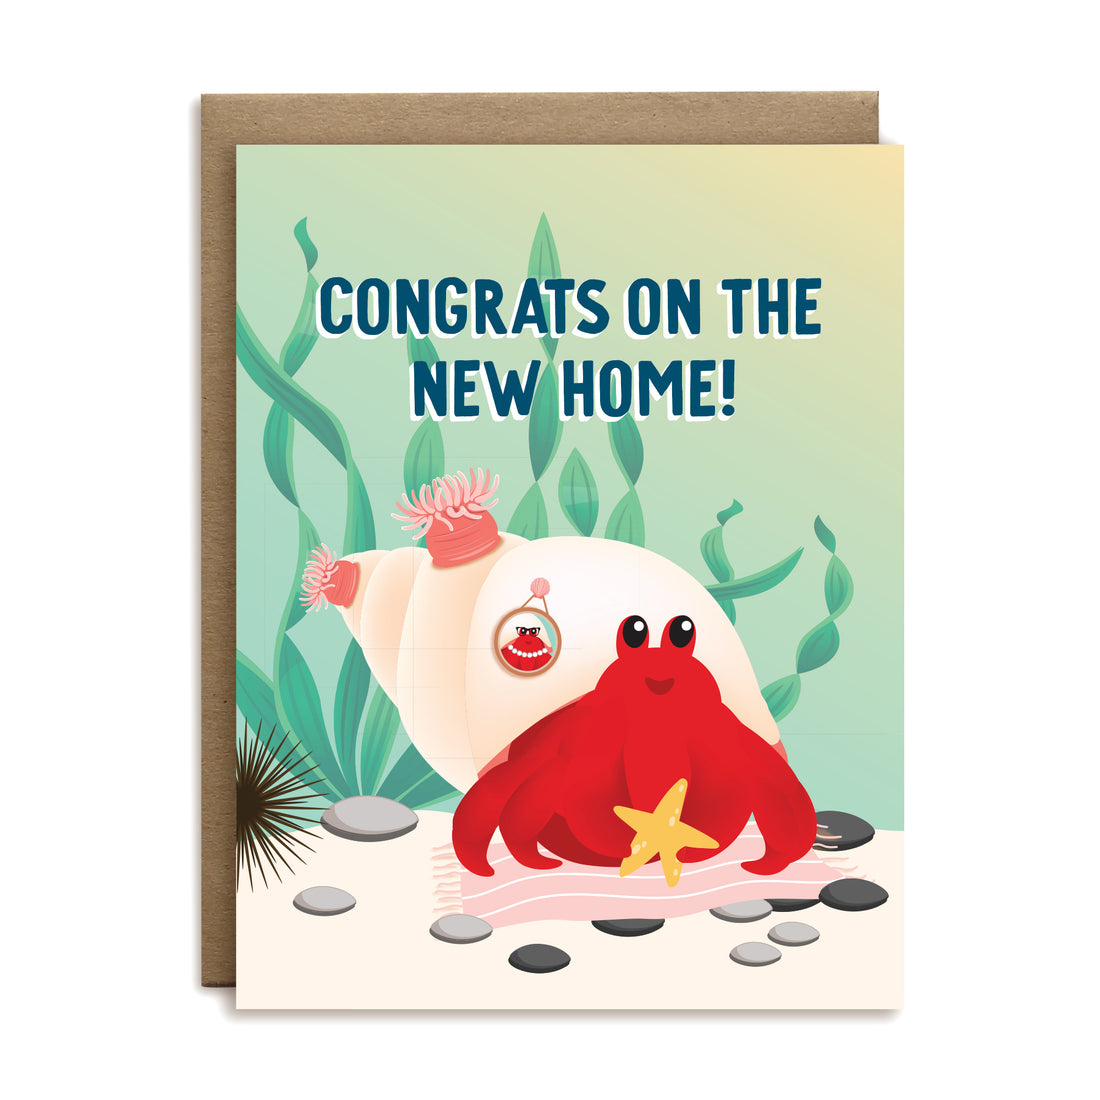 Congrats on the new home hermit crab greeting card by I&